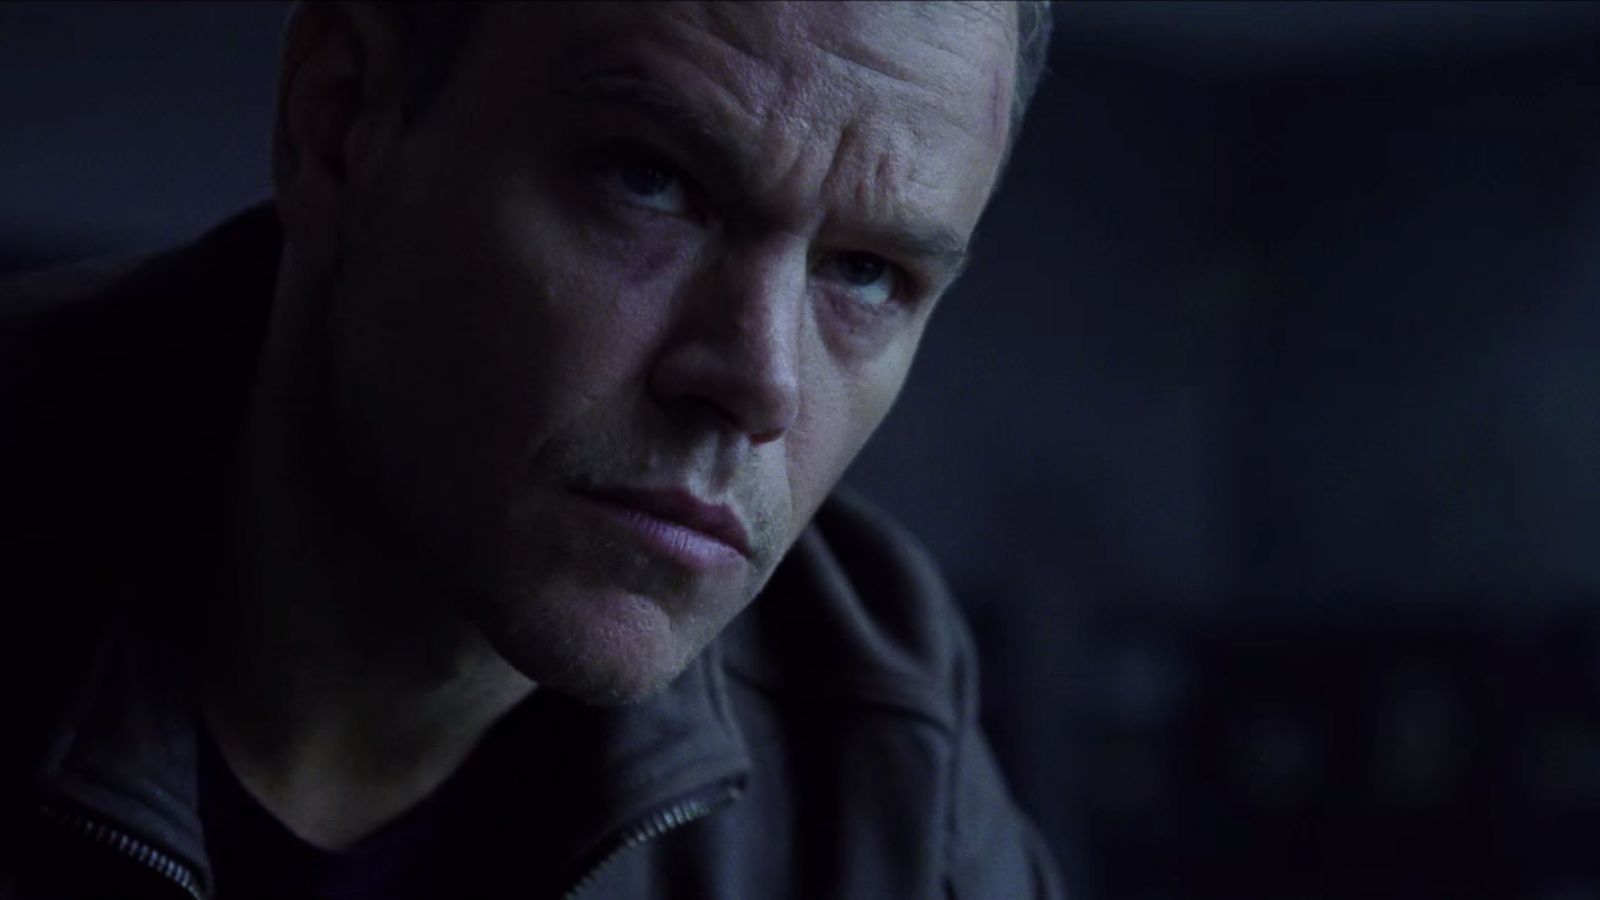 Jason Bourne': Everything We've Learned From Official